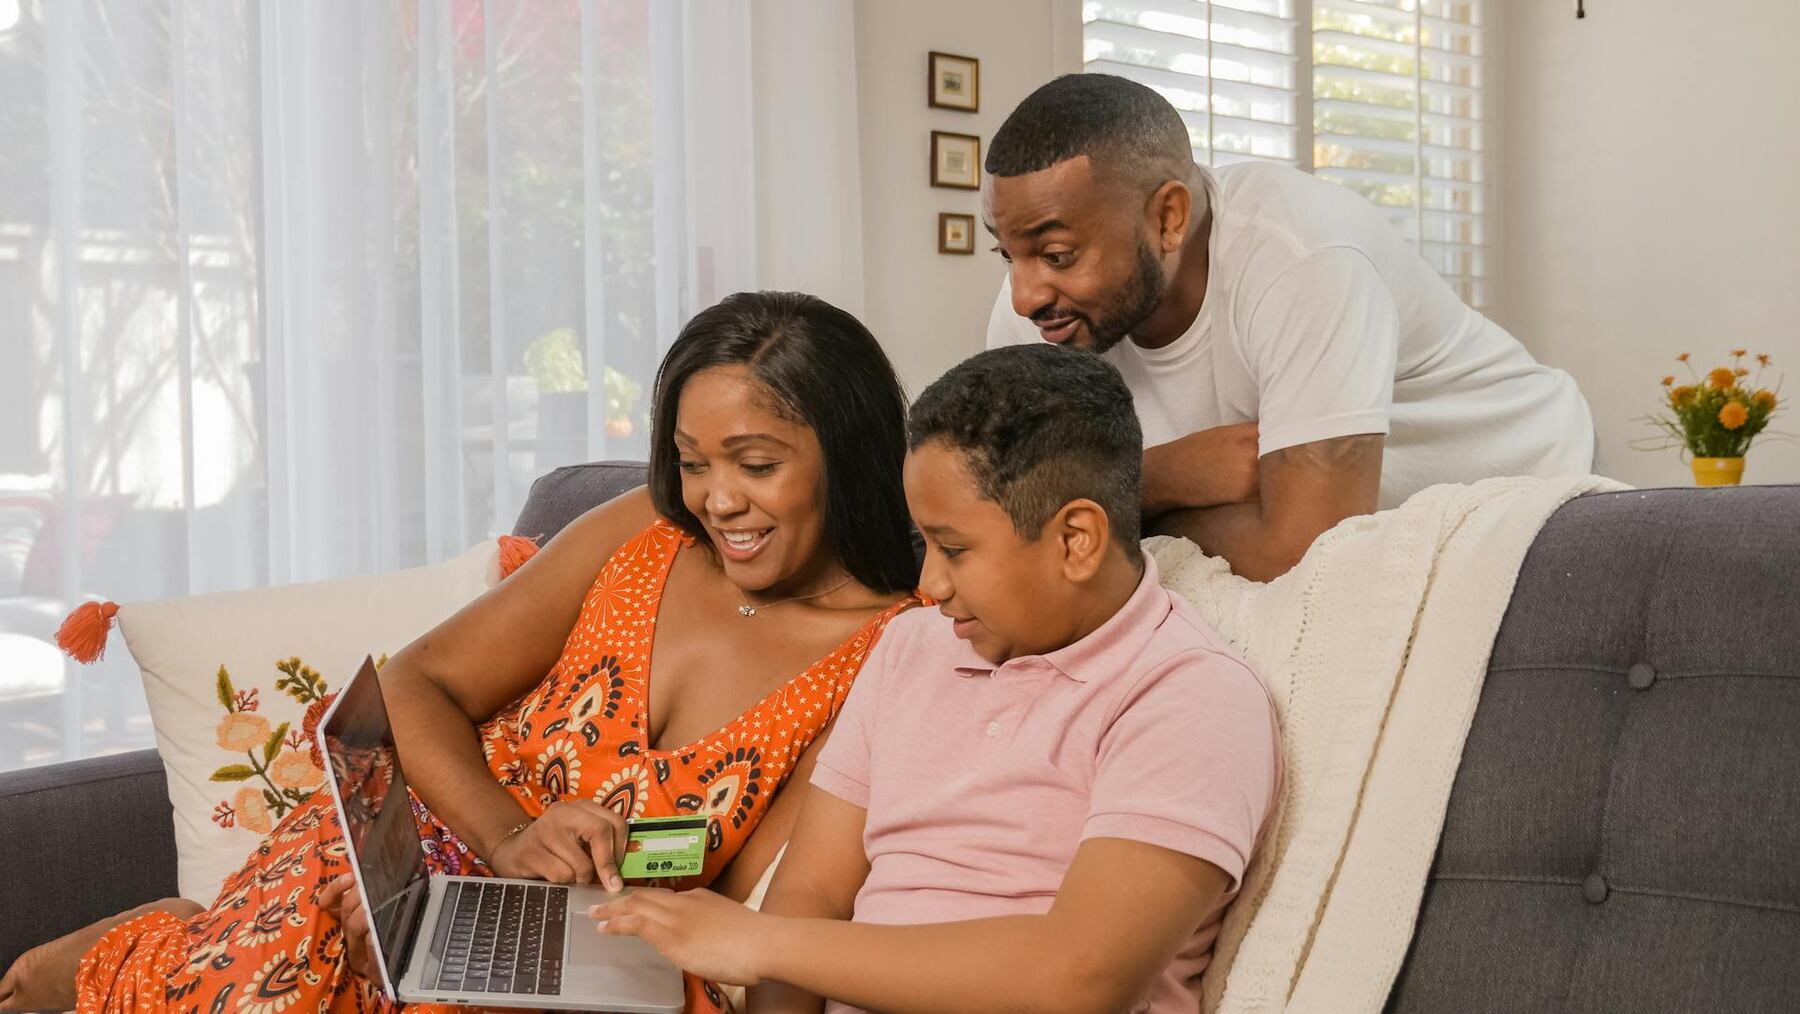 A family sitting on a couch with a laptop, enjoying quality time together at home